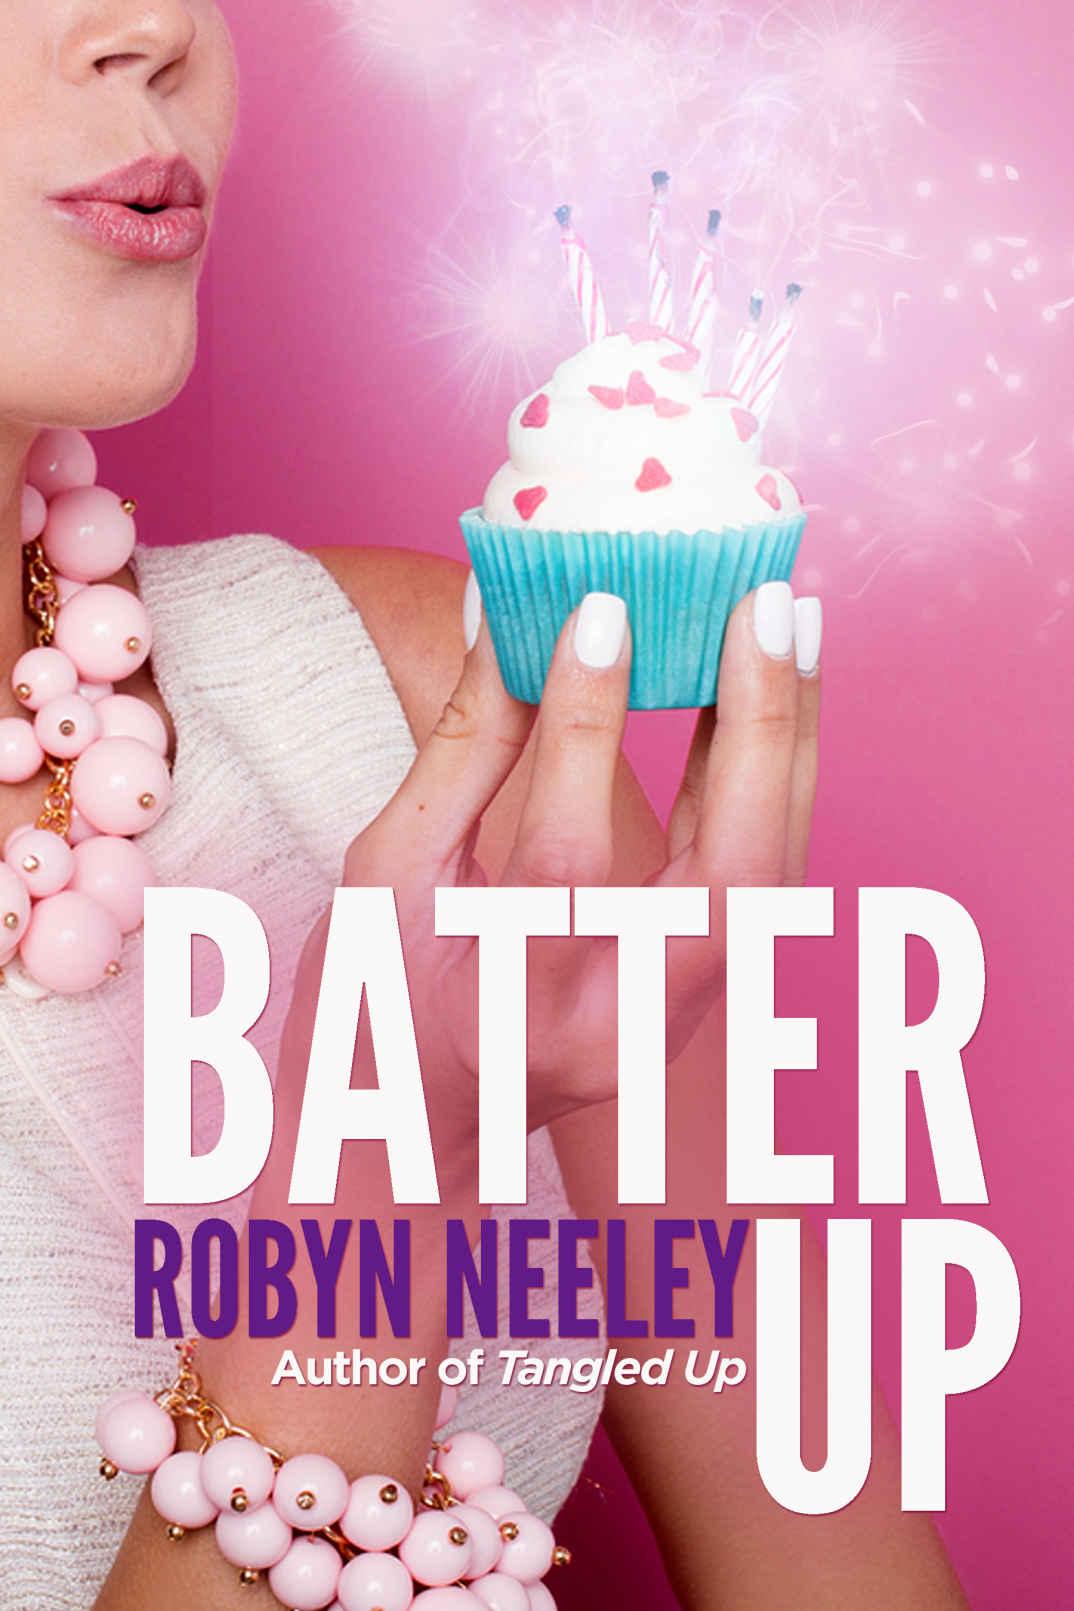 Batter Up (Bachelors of Buttermilk Falls Book 1) by Robyn Neeley